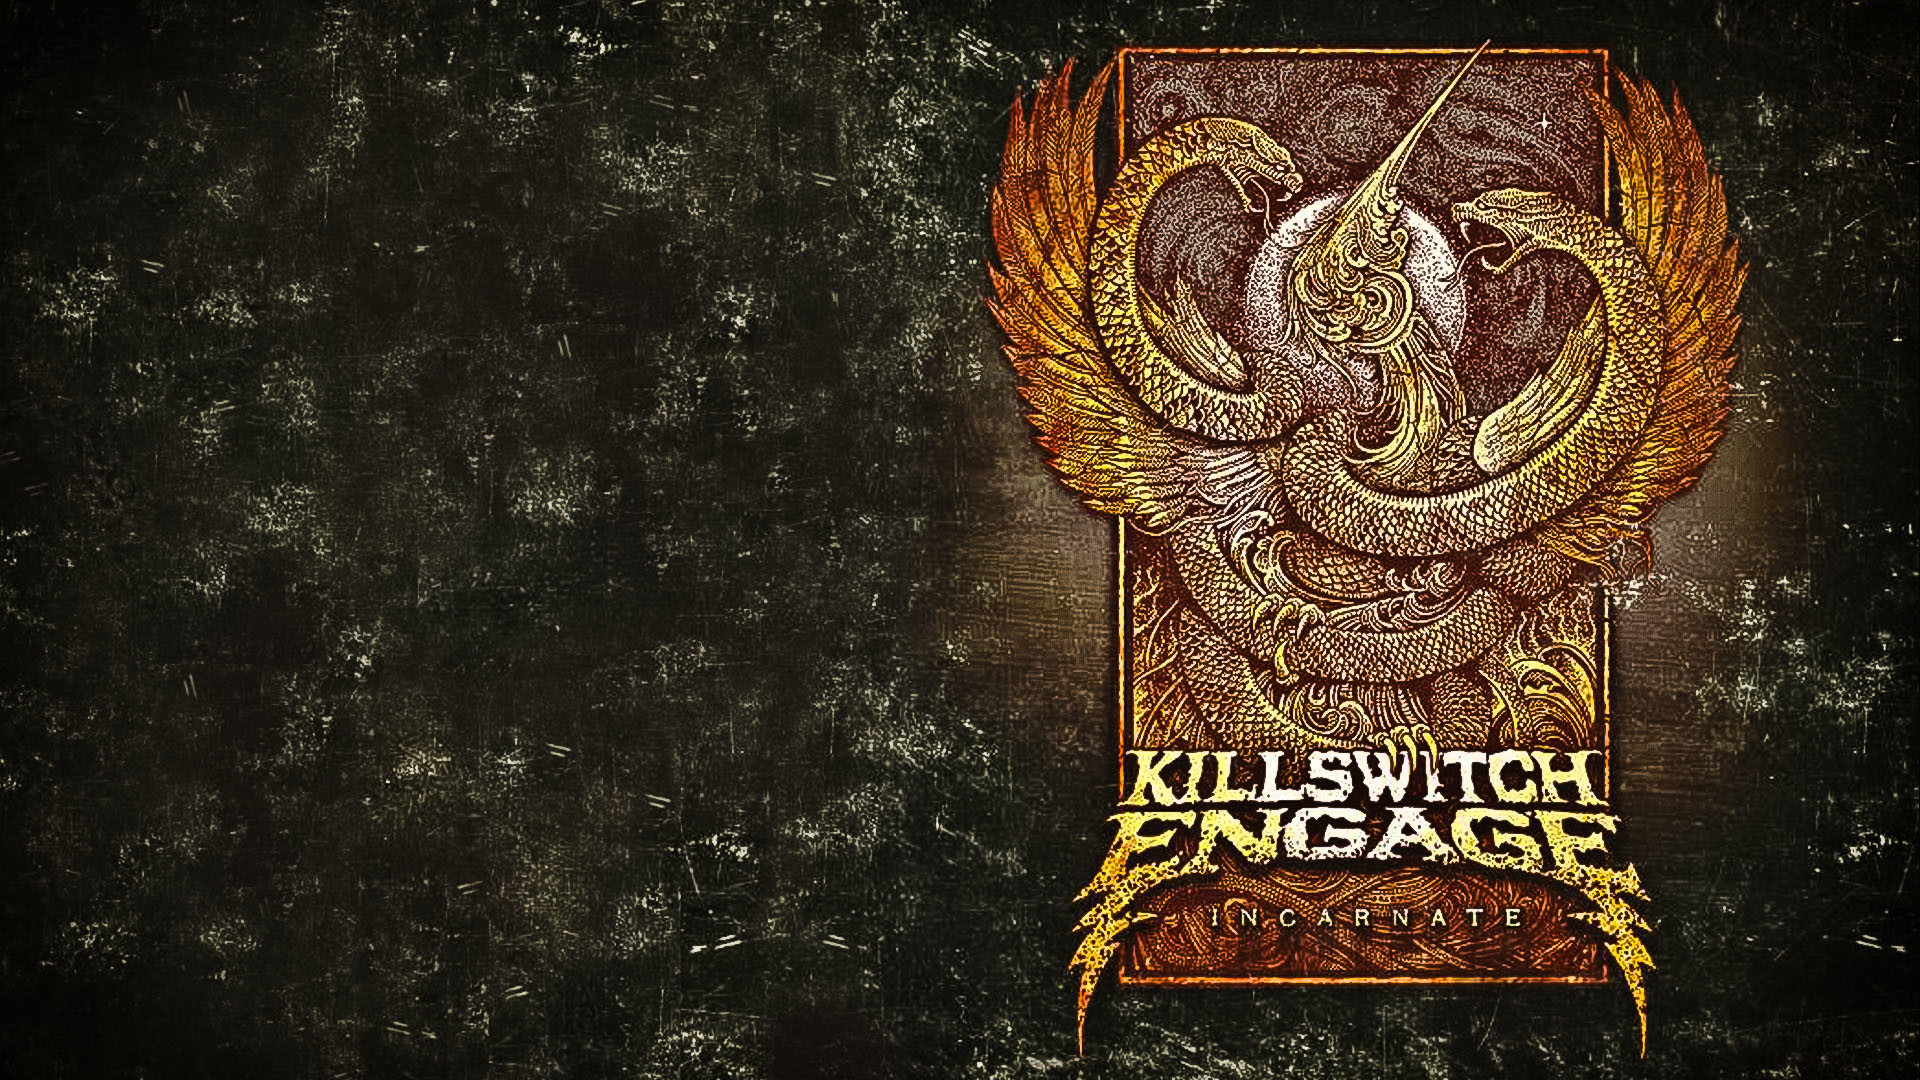 1920x1080 Killswitch Engage Incarnate based Wallpaper Hate by Design Strength of the  mind